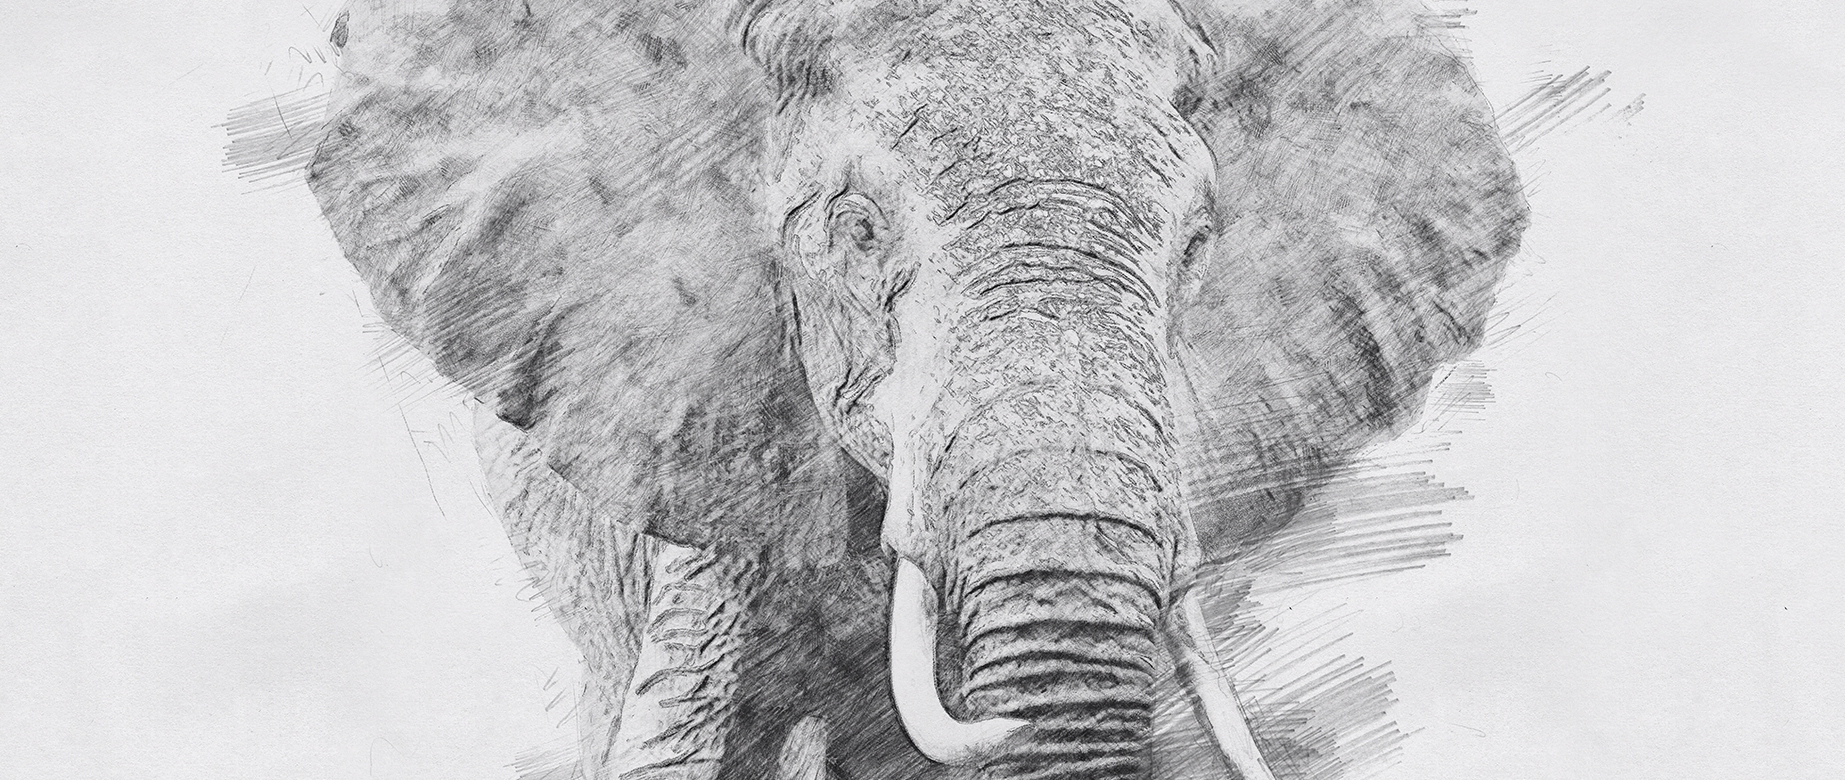 124 Pencil Drawings Of Elephants High Res Illustrations - Getty Images